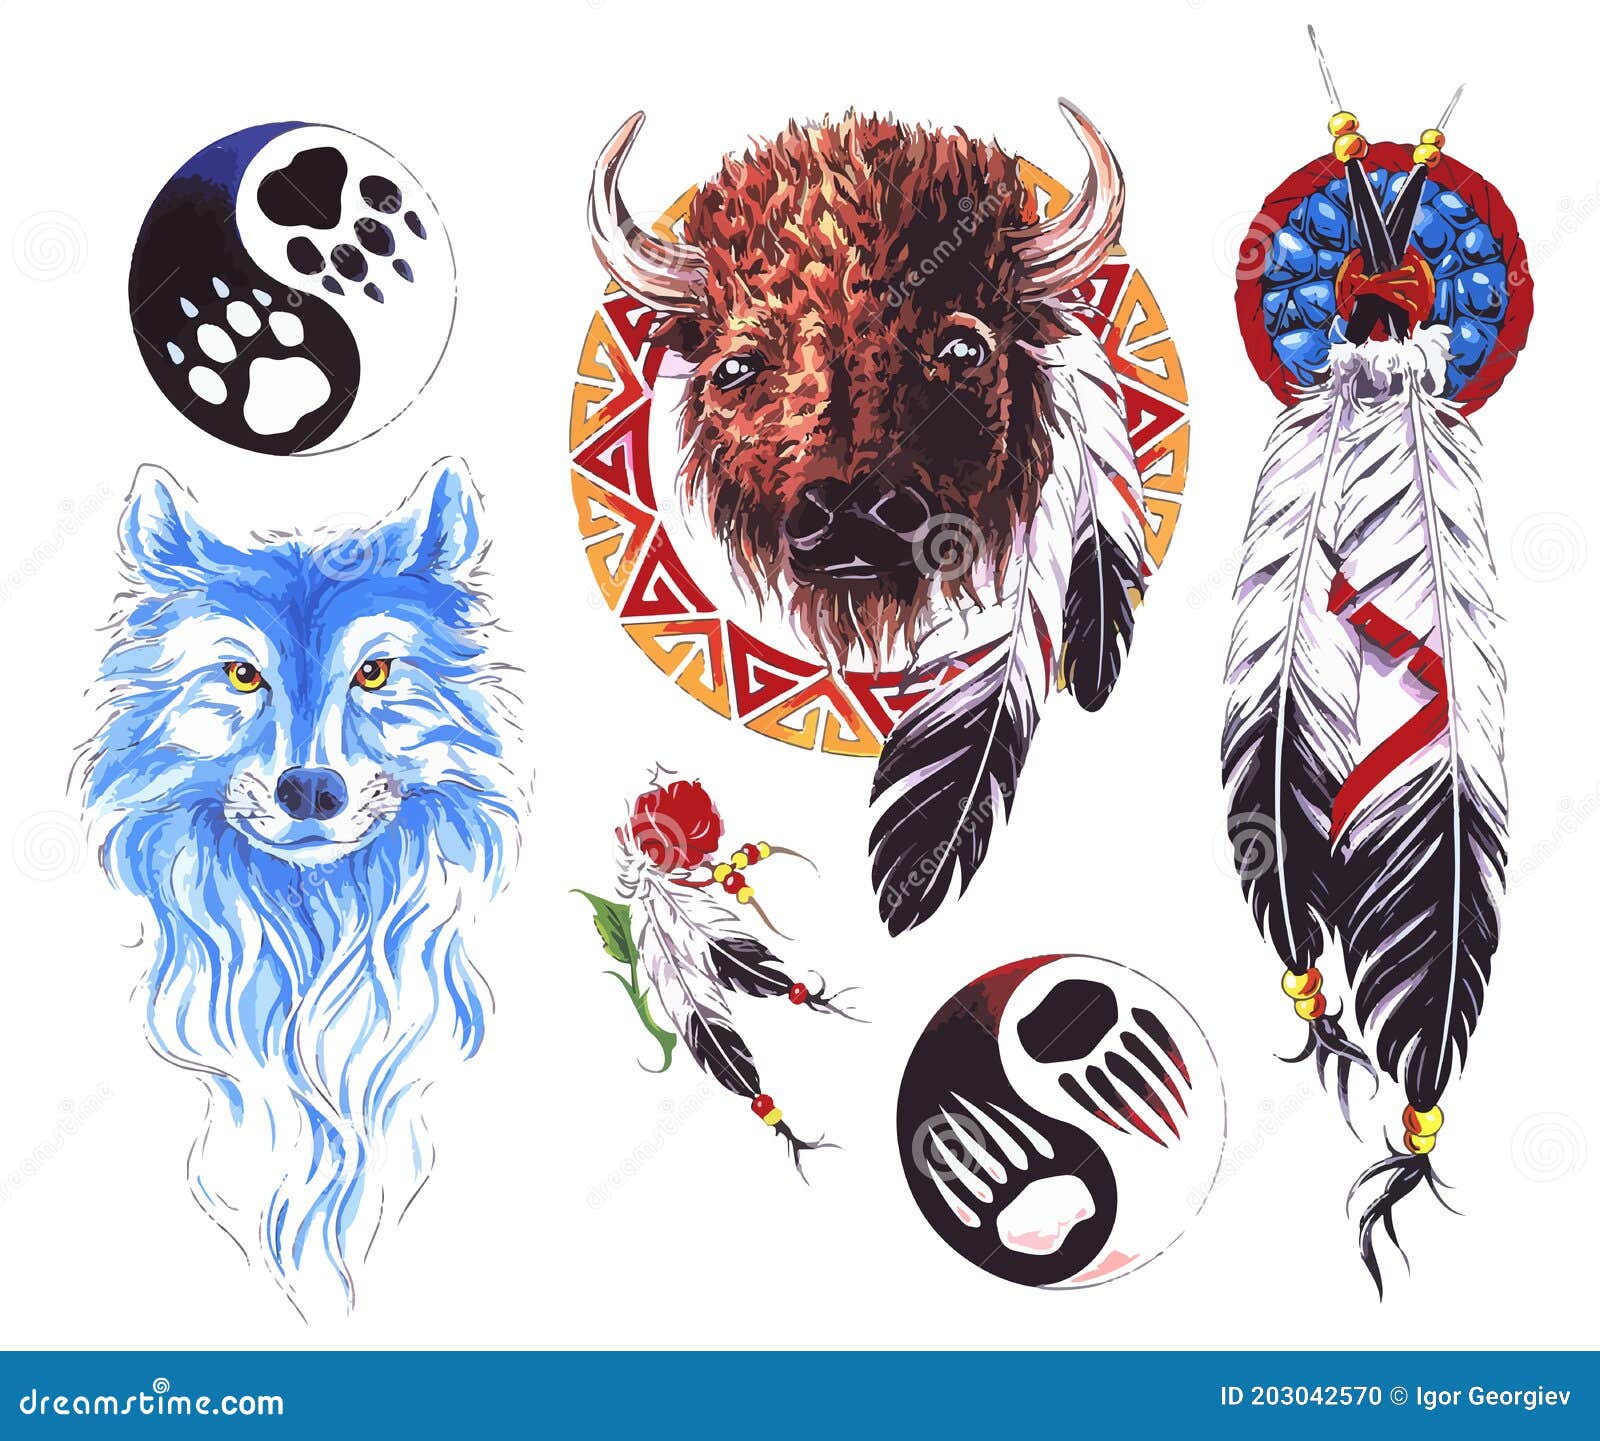 42700 Tribal Tattoo Stock Photos Pictures  RoyaltyFree Images  iStock   Tribal tattoo pattern Tribal tattoo design Tribal tattoo vector